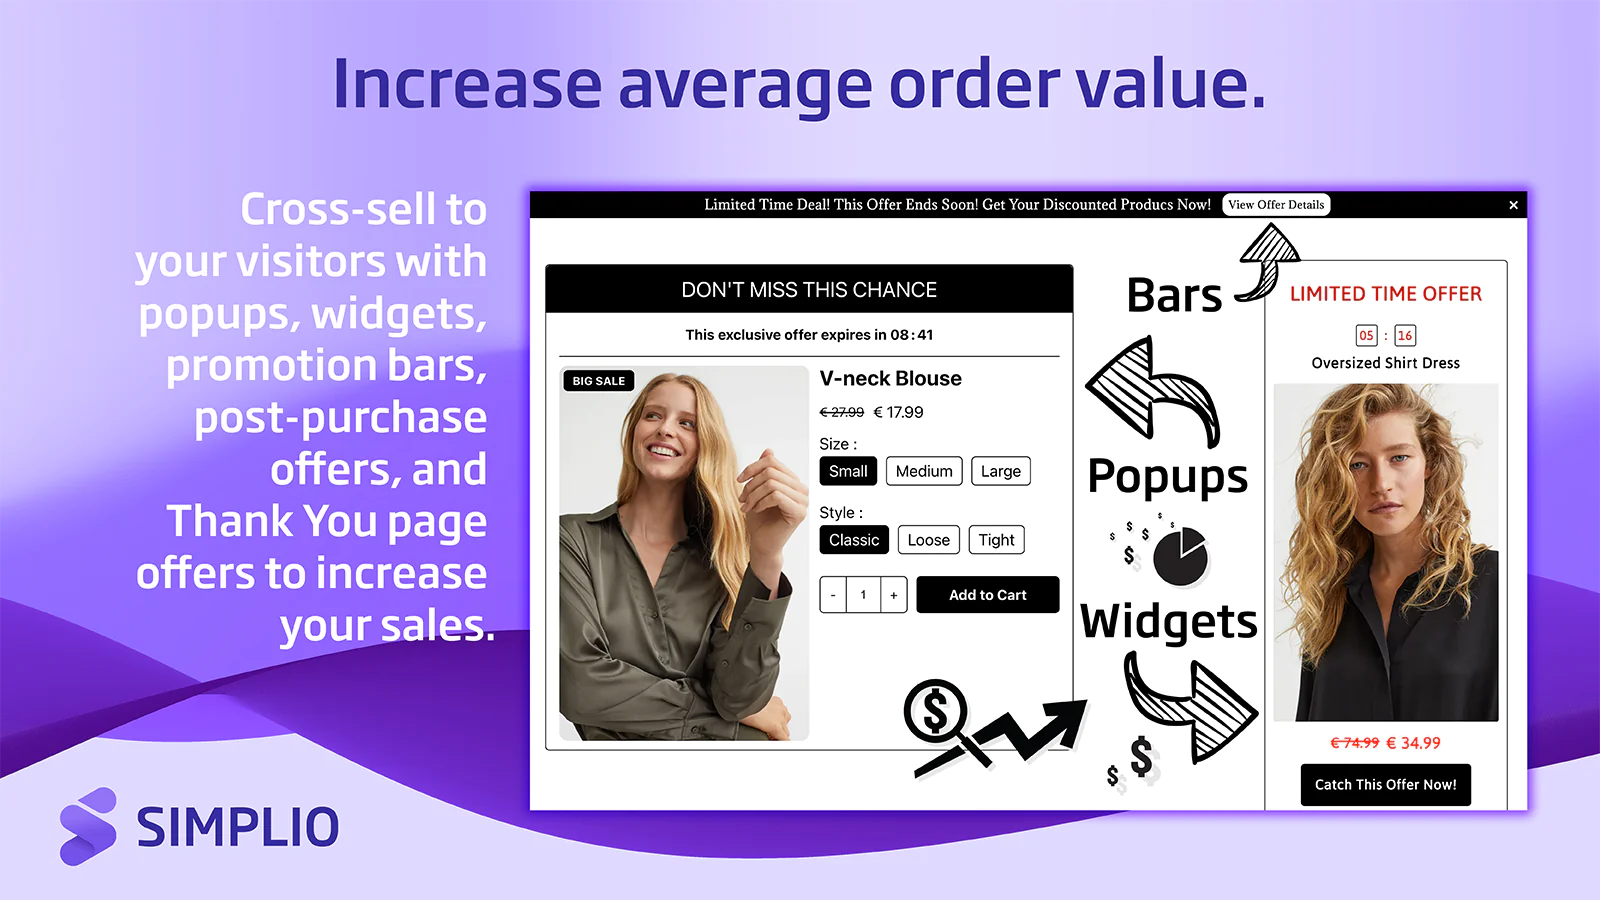 Create amazing offers to cross sell to your visitors.